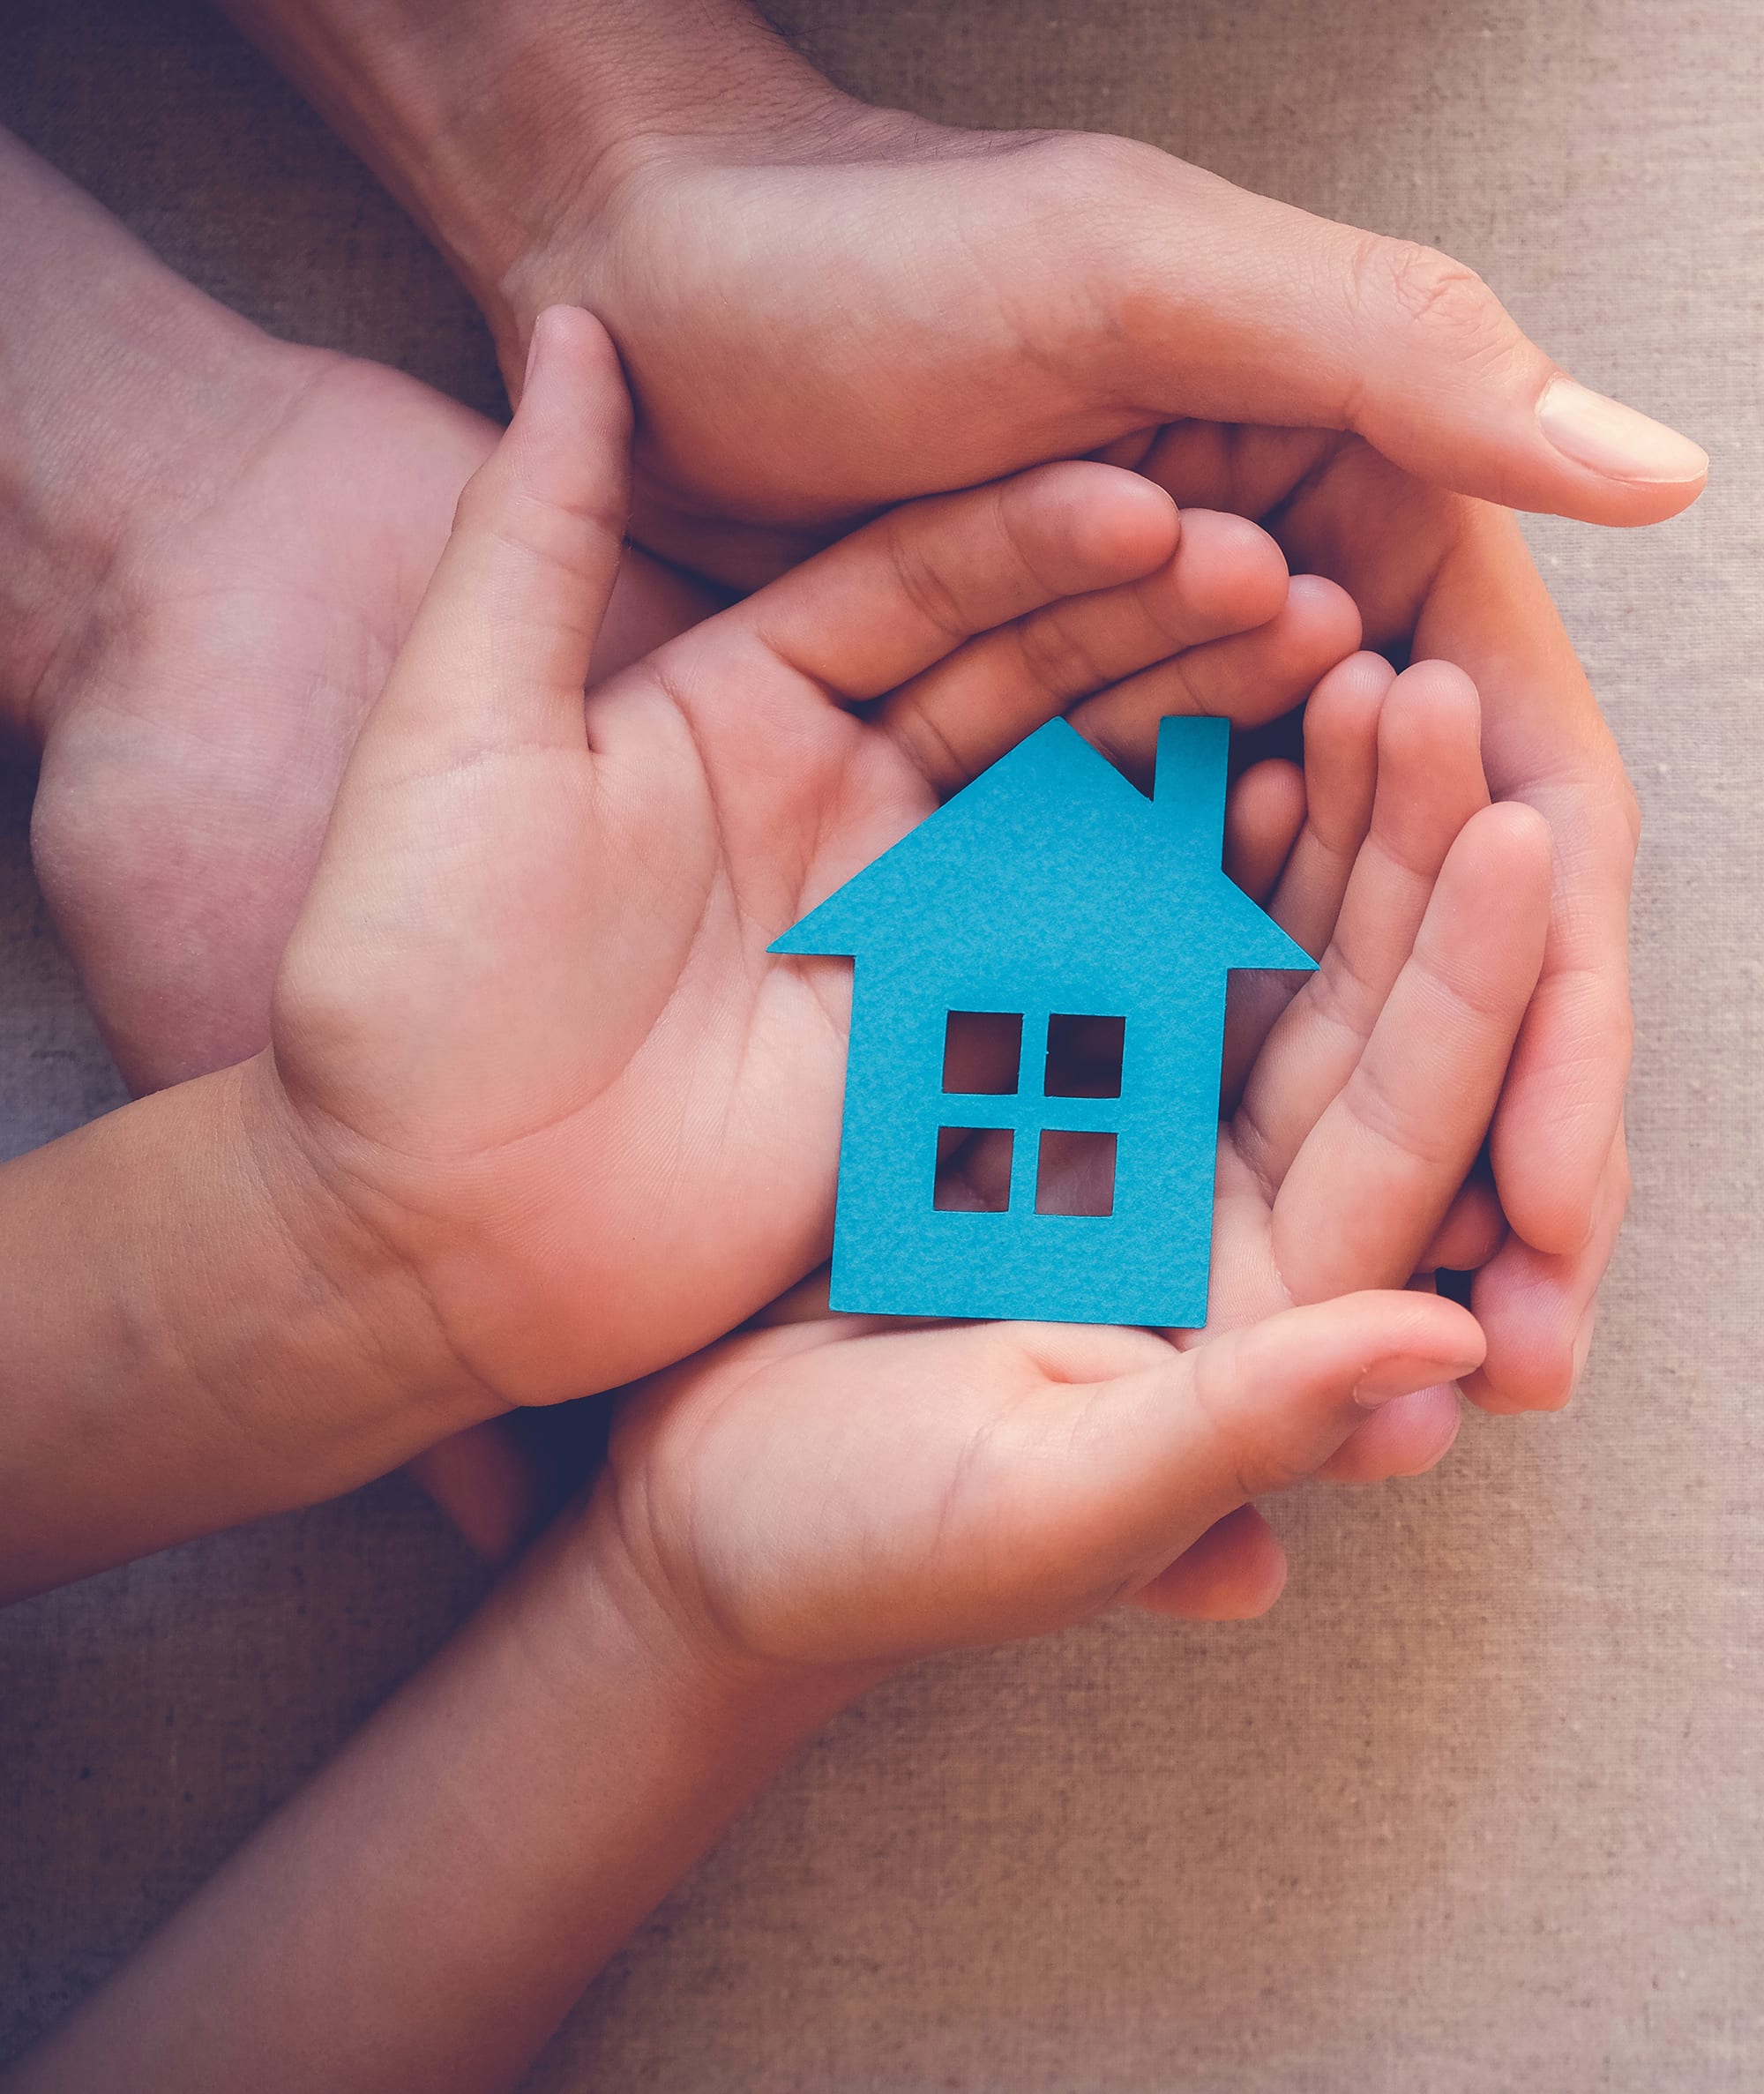 two open faced hands holding a blue paper cutout in the shape of a house